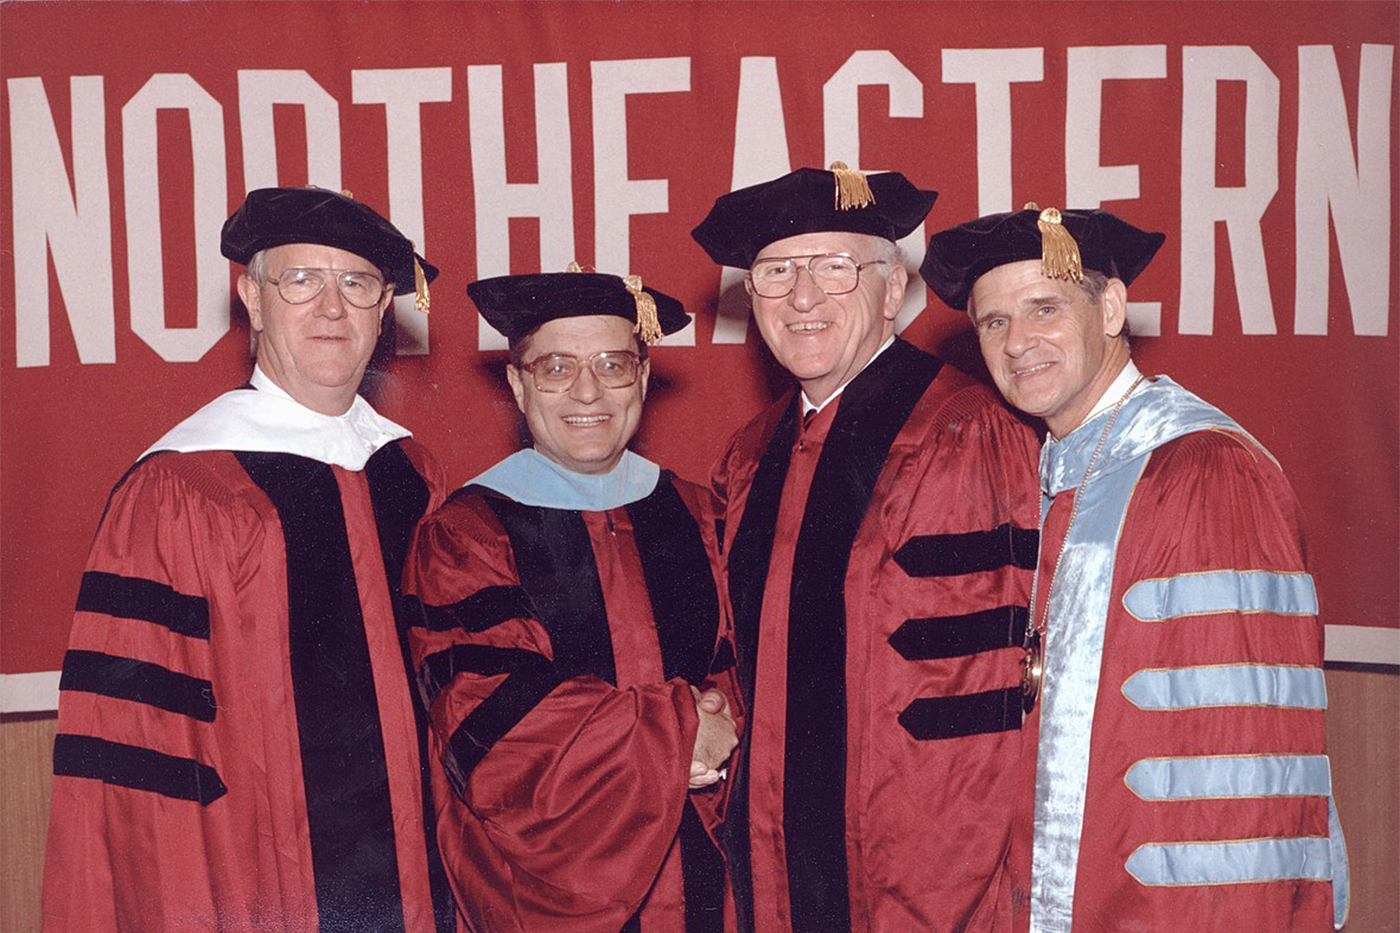 Four people, including George Matthews, wear black, red, and blue doctoral regalia while they stand in front of a red "Northeastern" sign with white text.